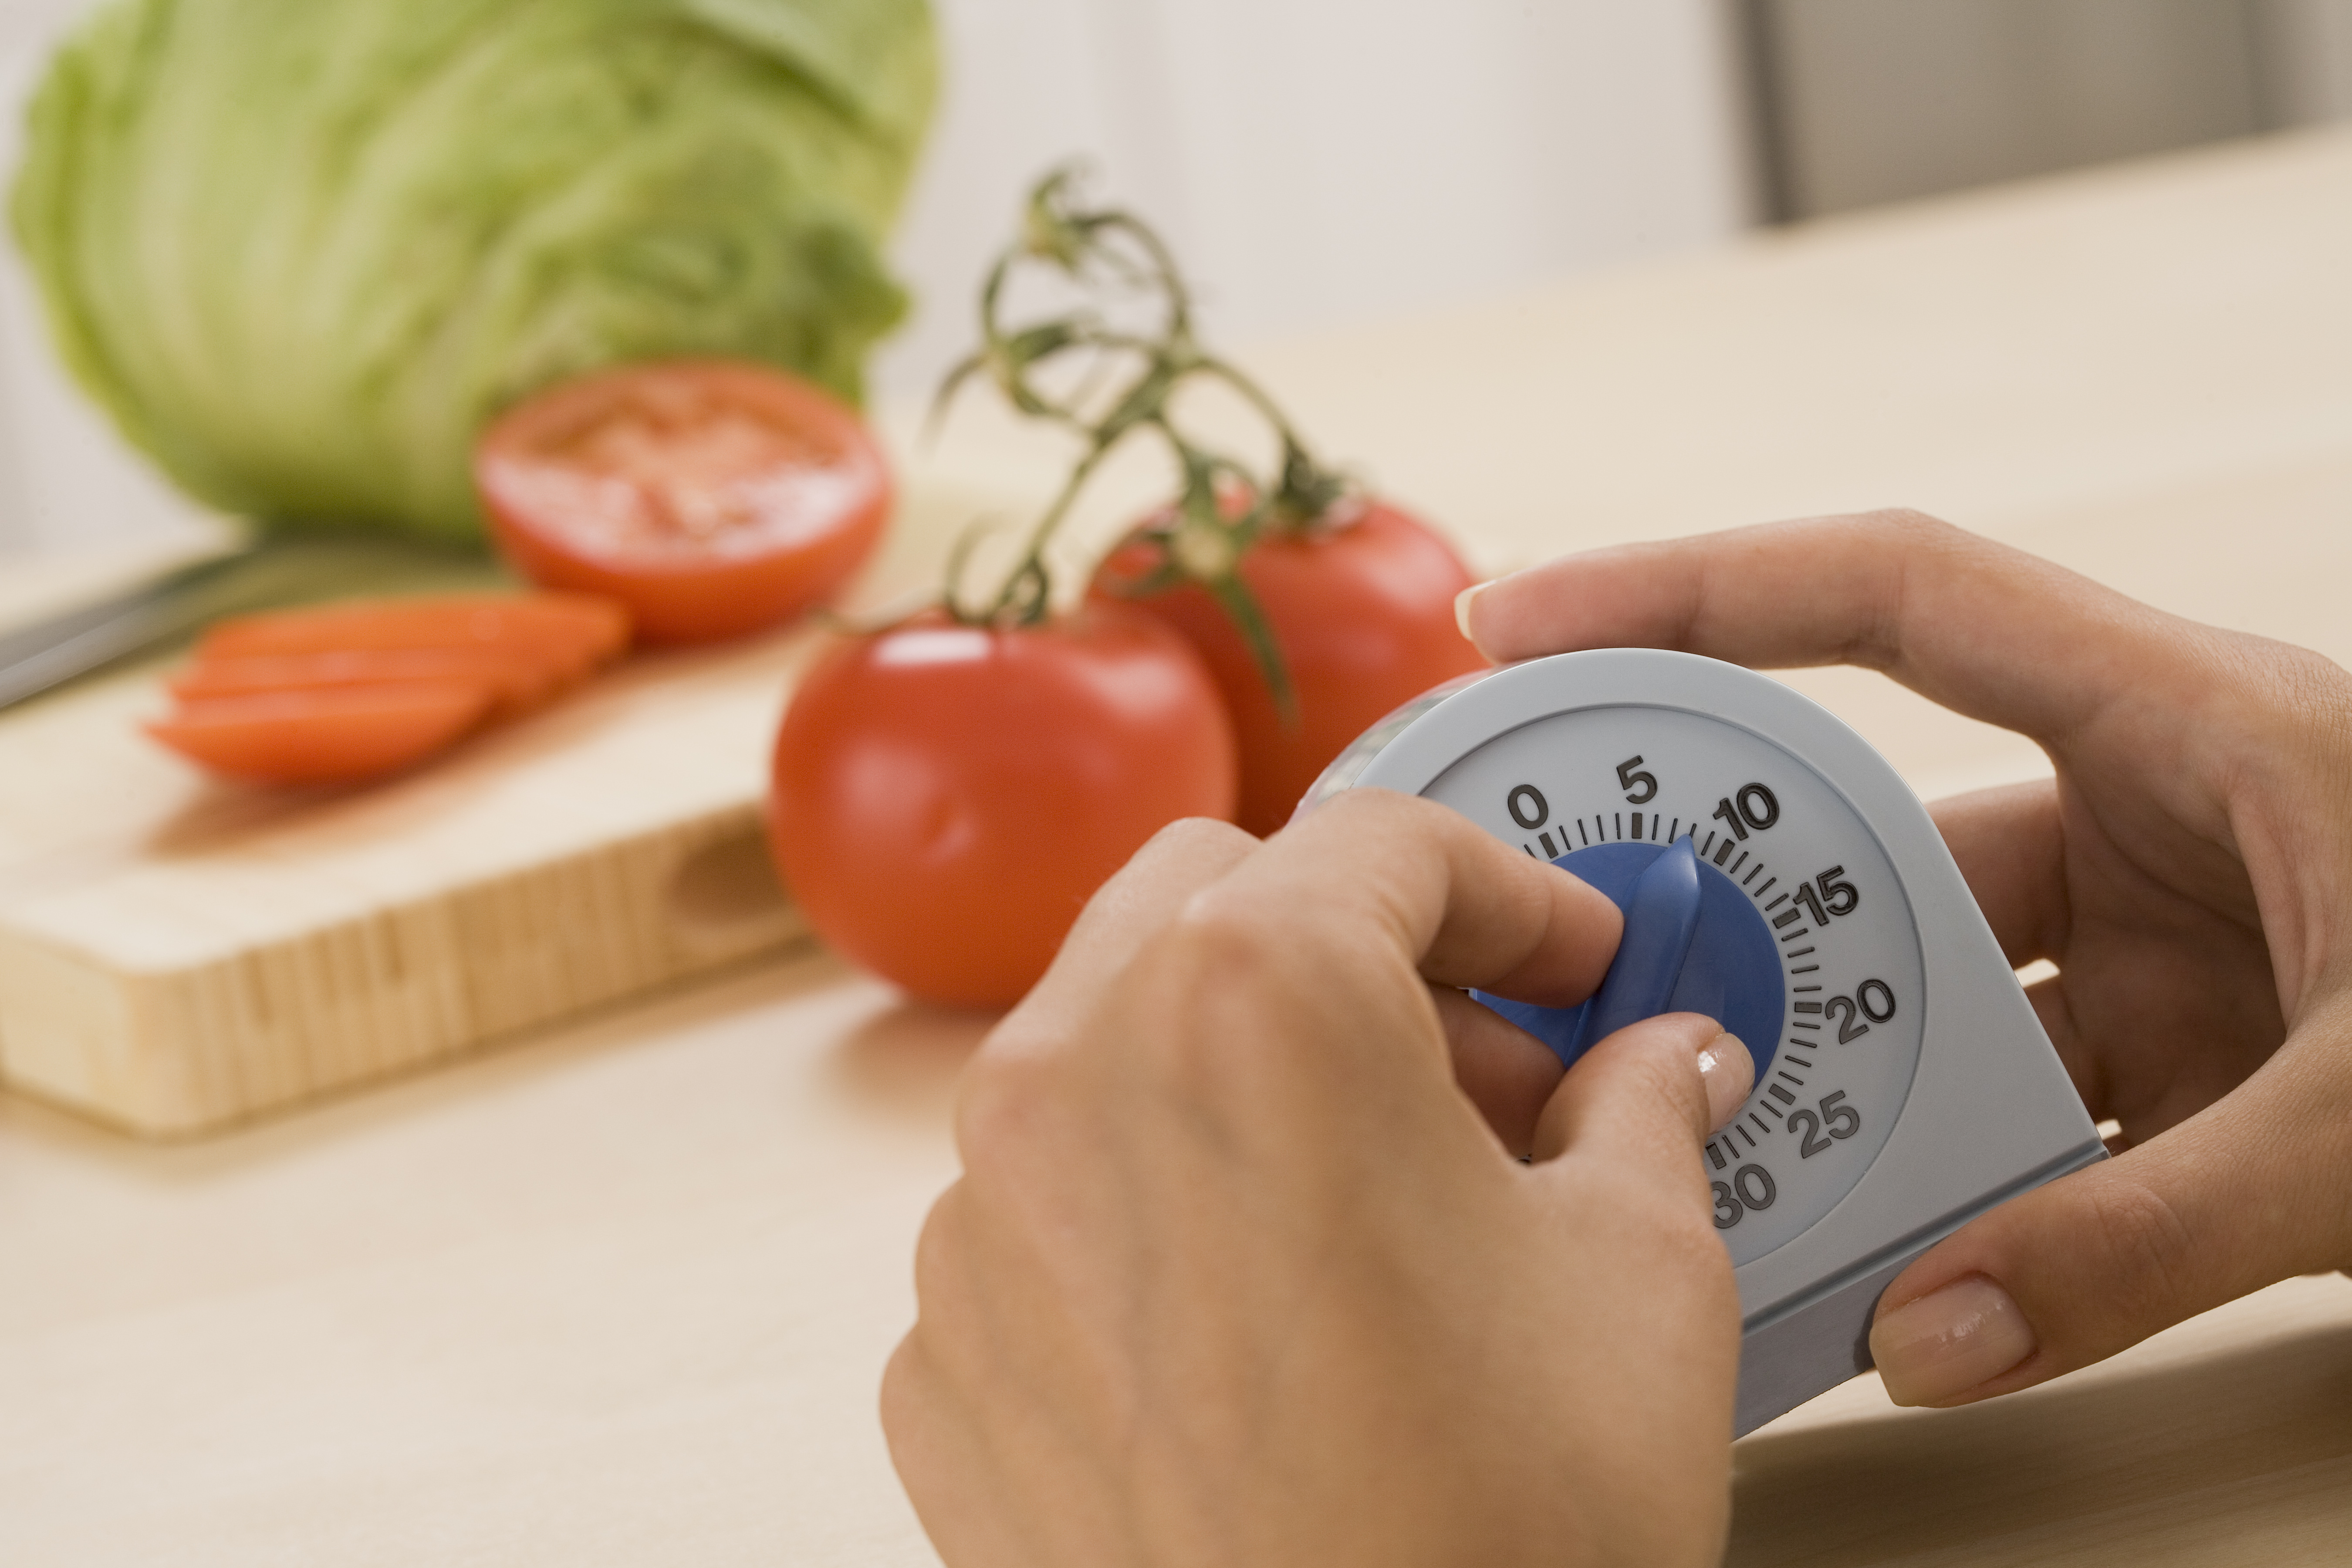 The 10 Best Kitchen Timers - Best Timers for the Kitchen